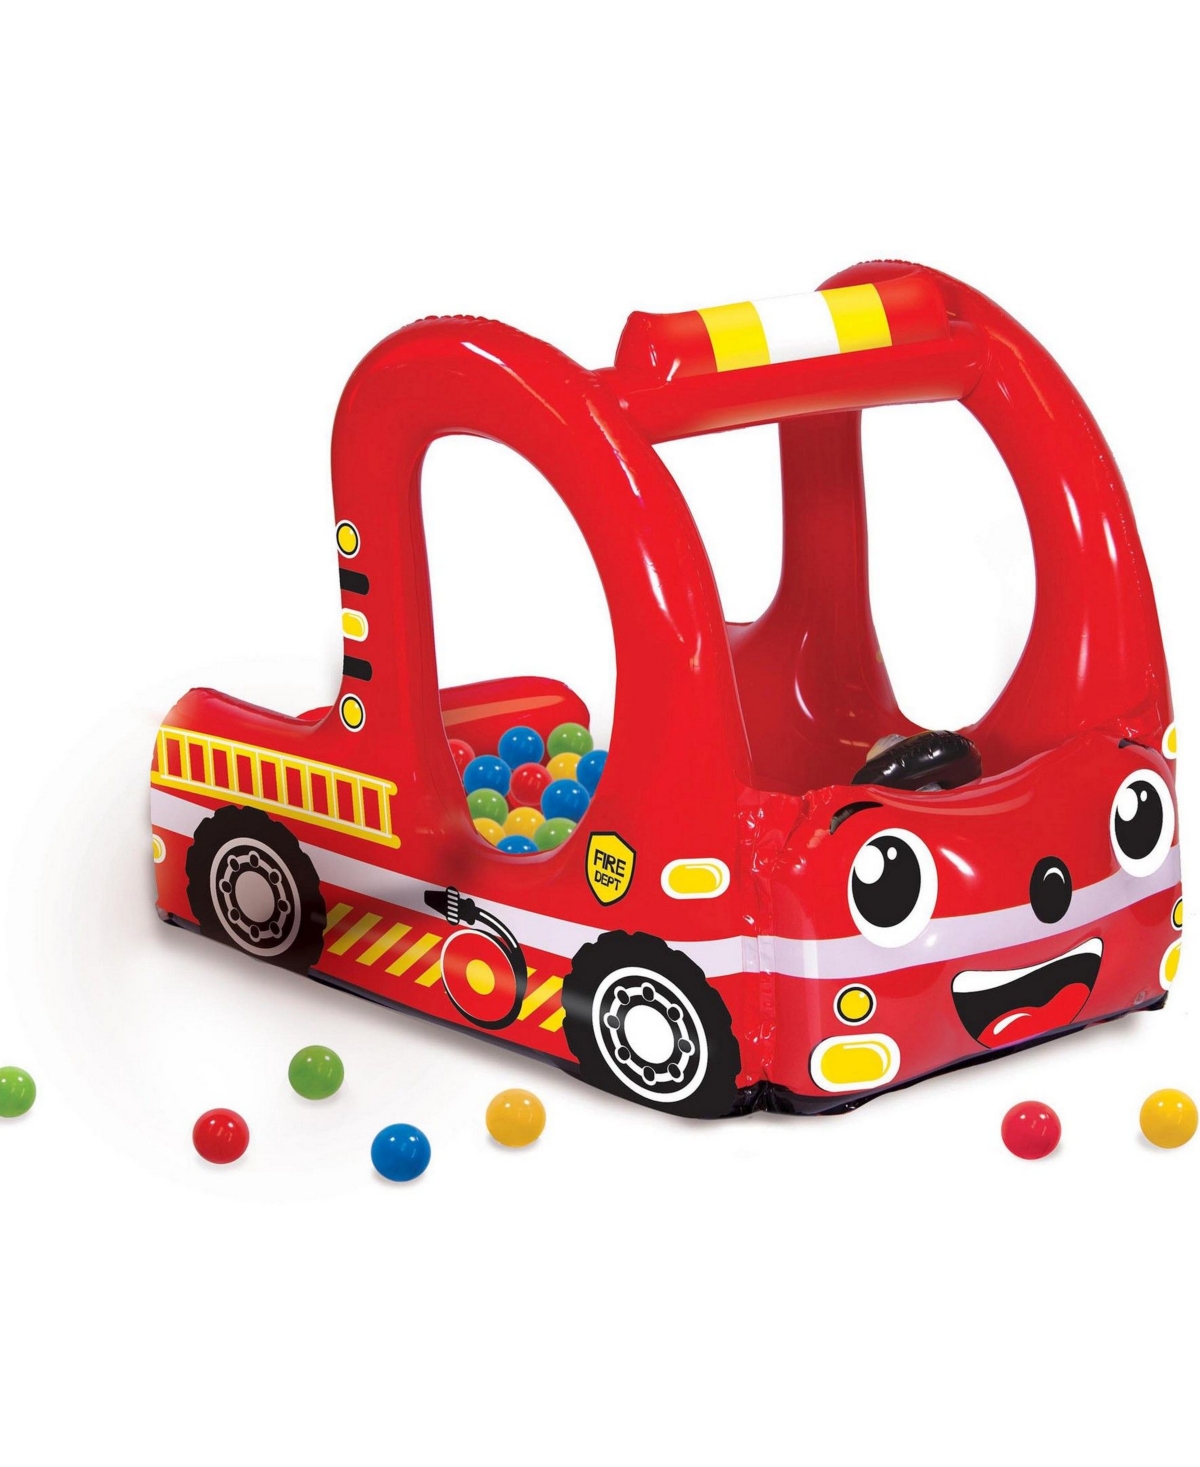 Redbox Banzai Rescue Fire Truck Play Center Inflatable Ball Pit -includes 20 Balls In Multi